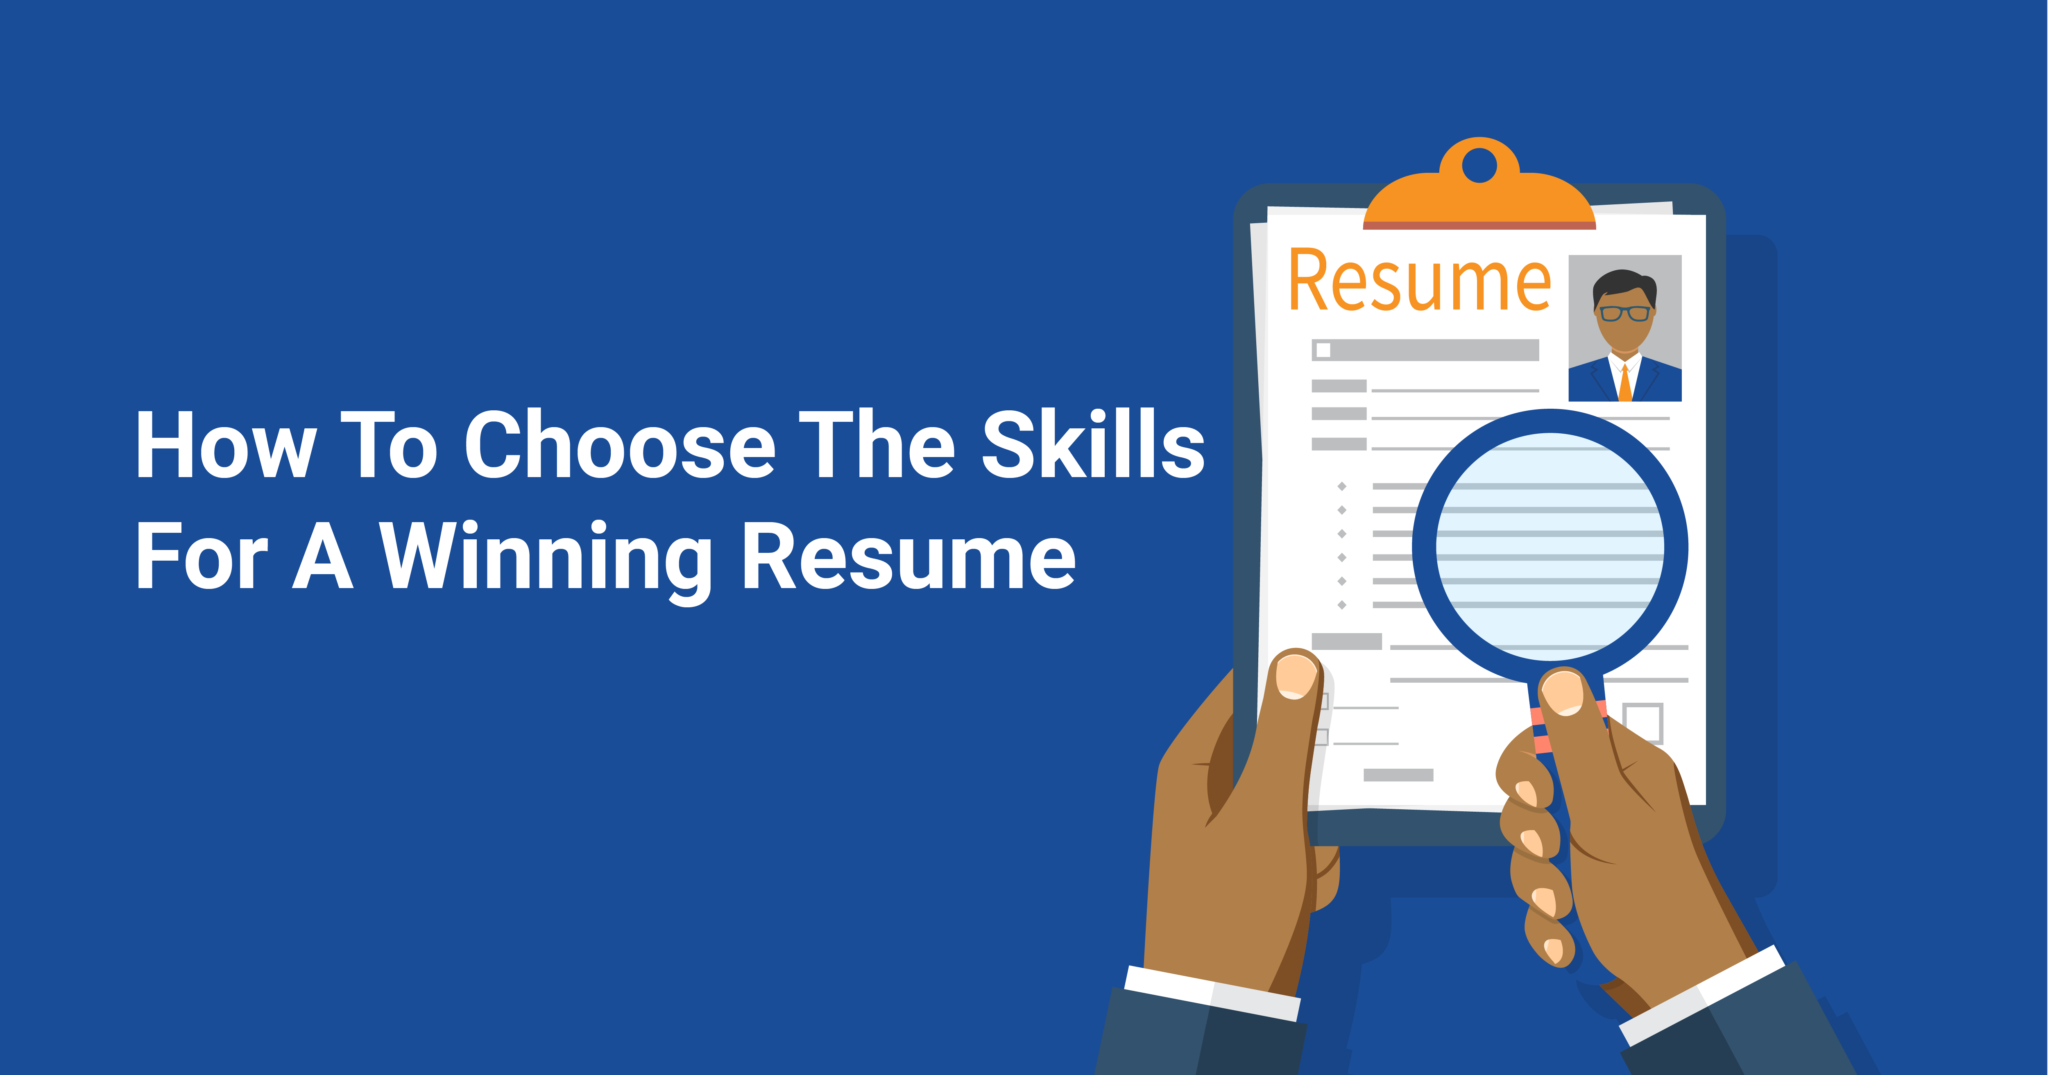 How to Choose the Skills for a Winning Resume